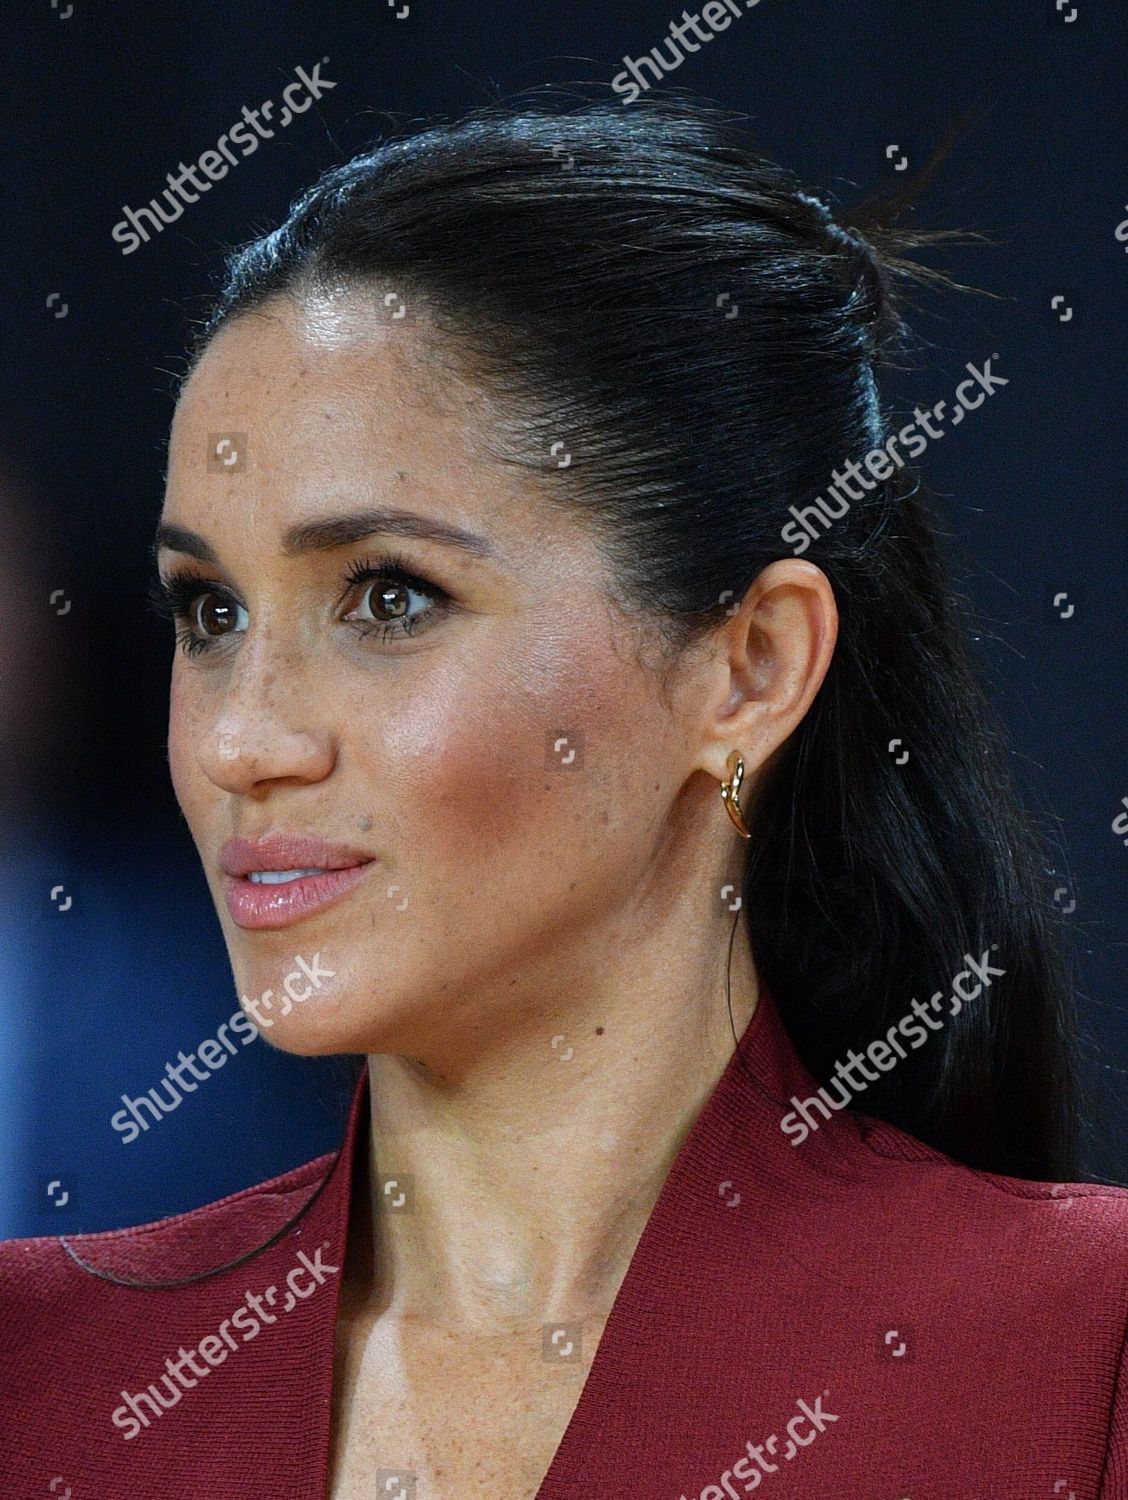 prince-harry-and-meghan-duchess-of-sussex-tour-of-australia-shutterstock-editorial-9946006bh.jpg